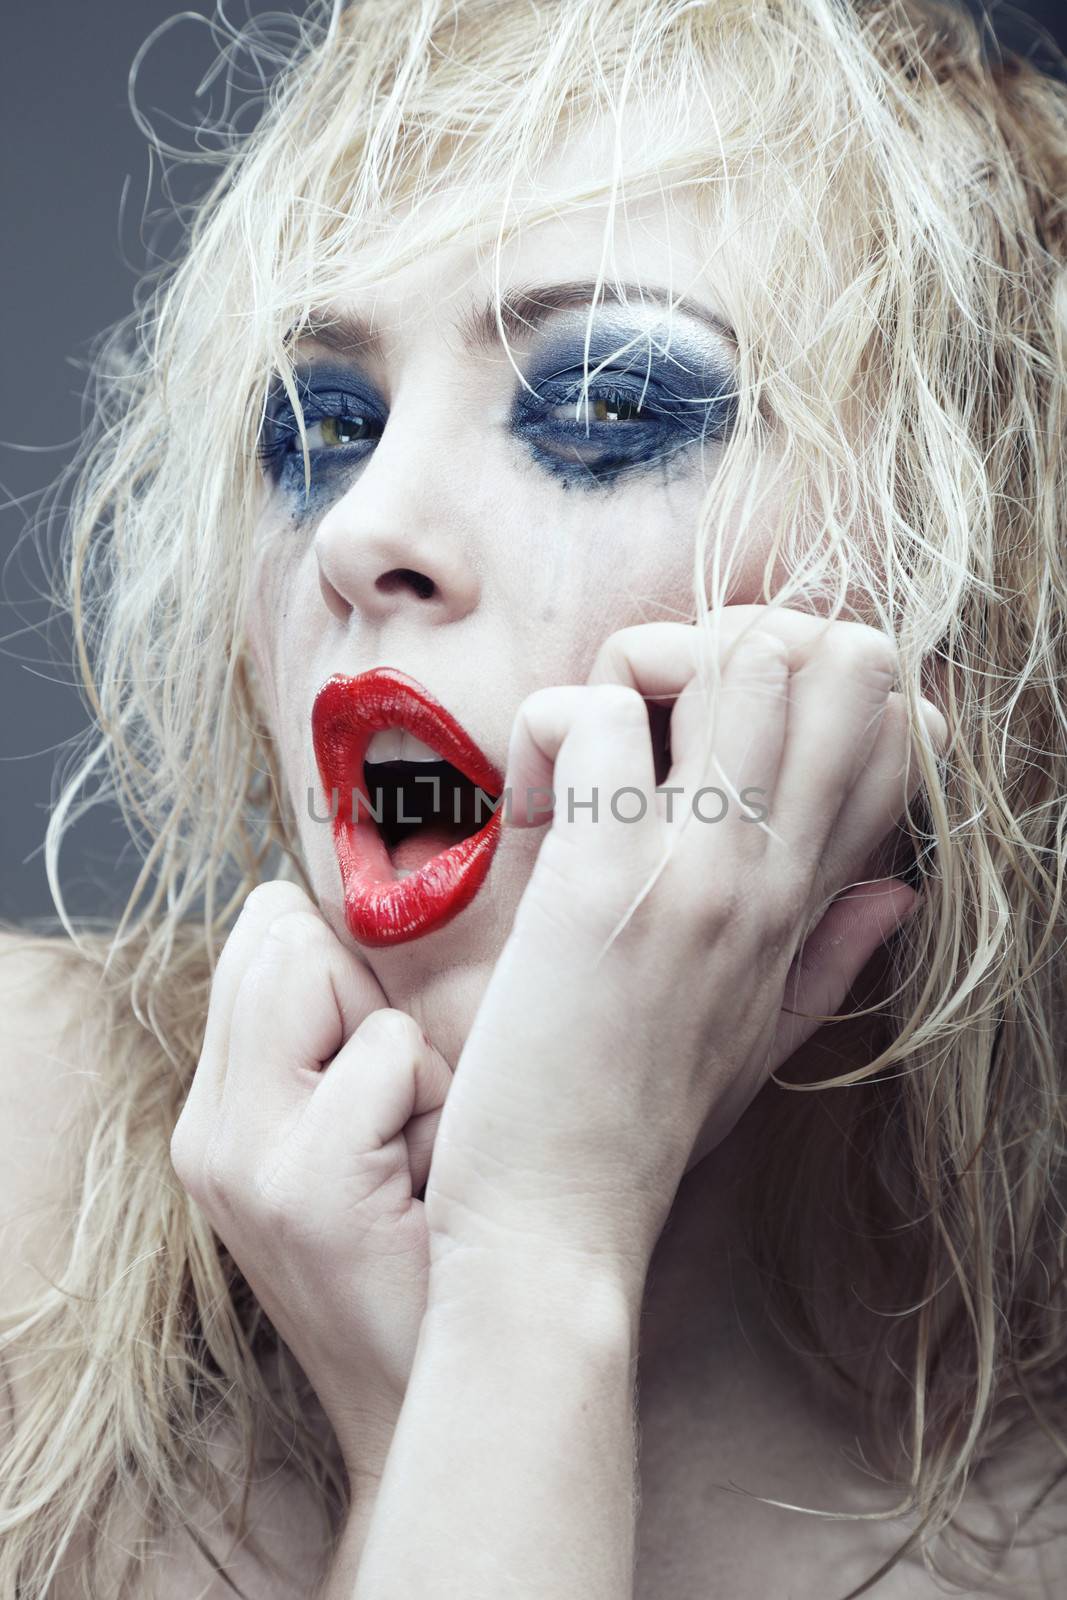 Crazy blond lady with bizarre makeup. Vertical portrait. Artistic colors added